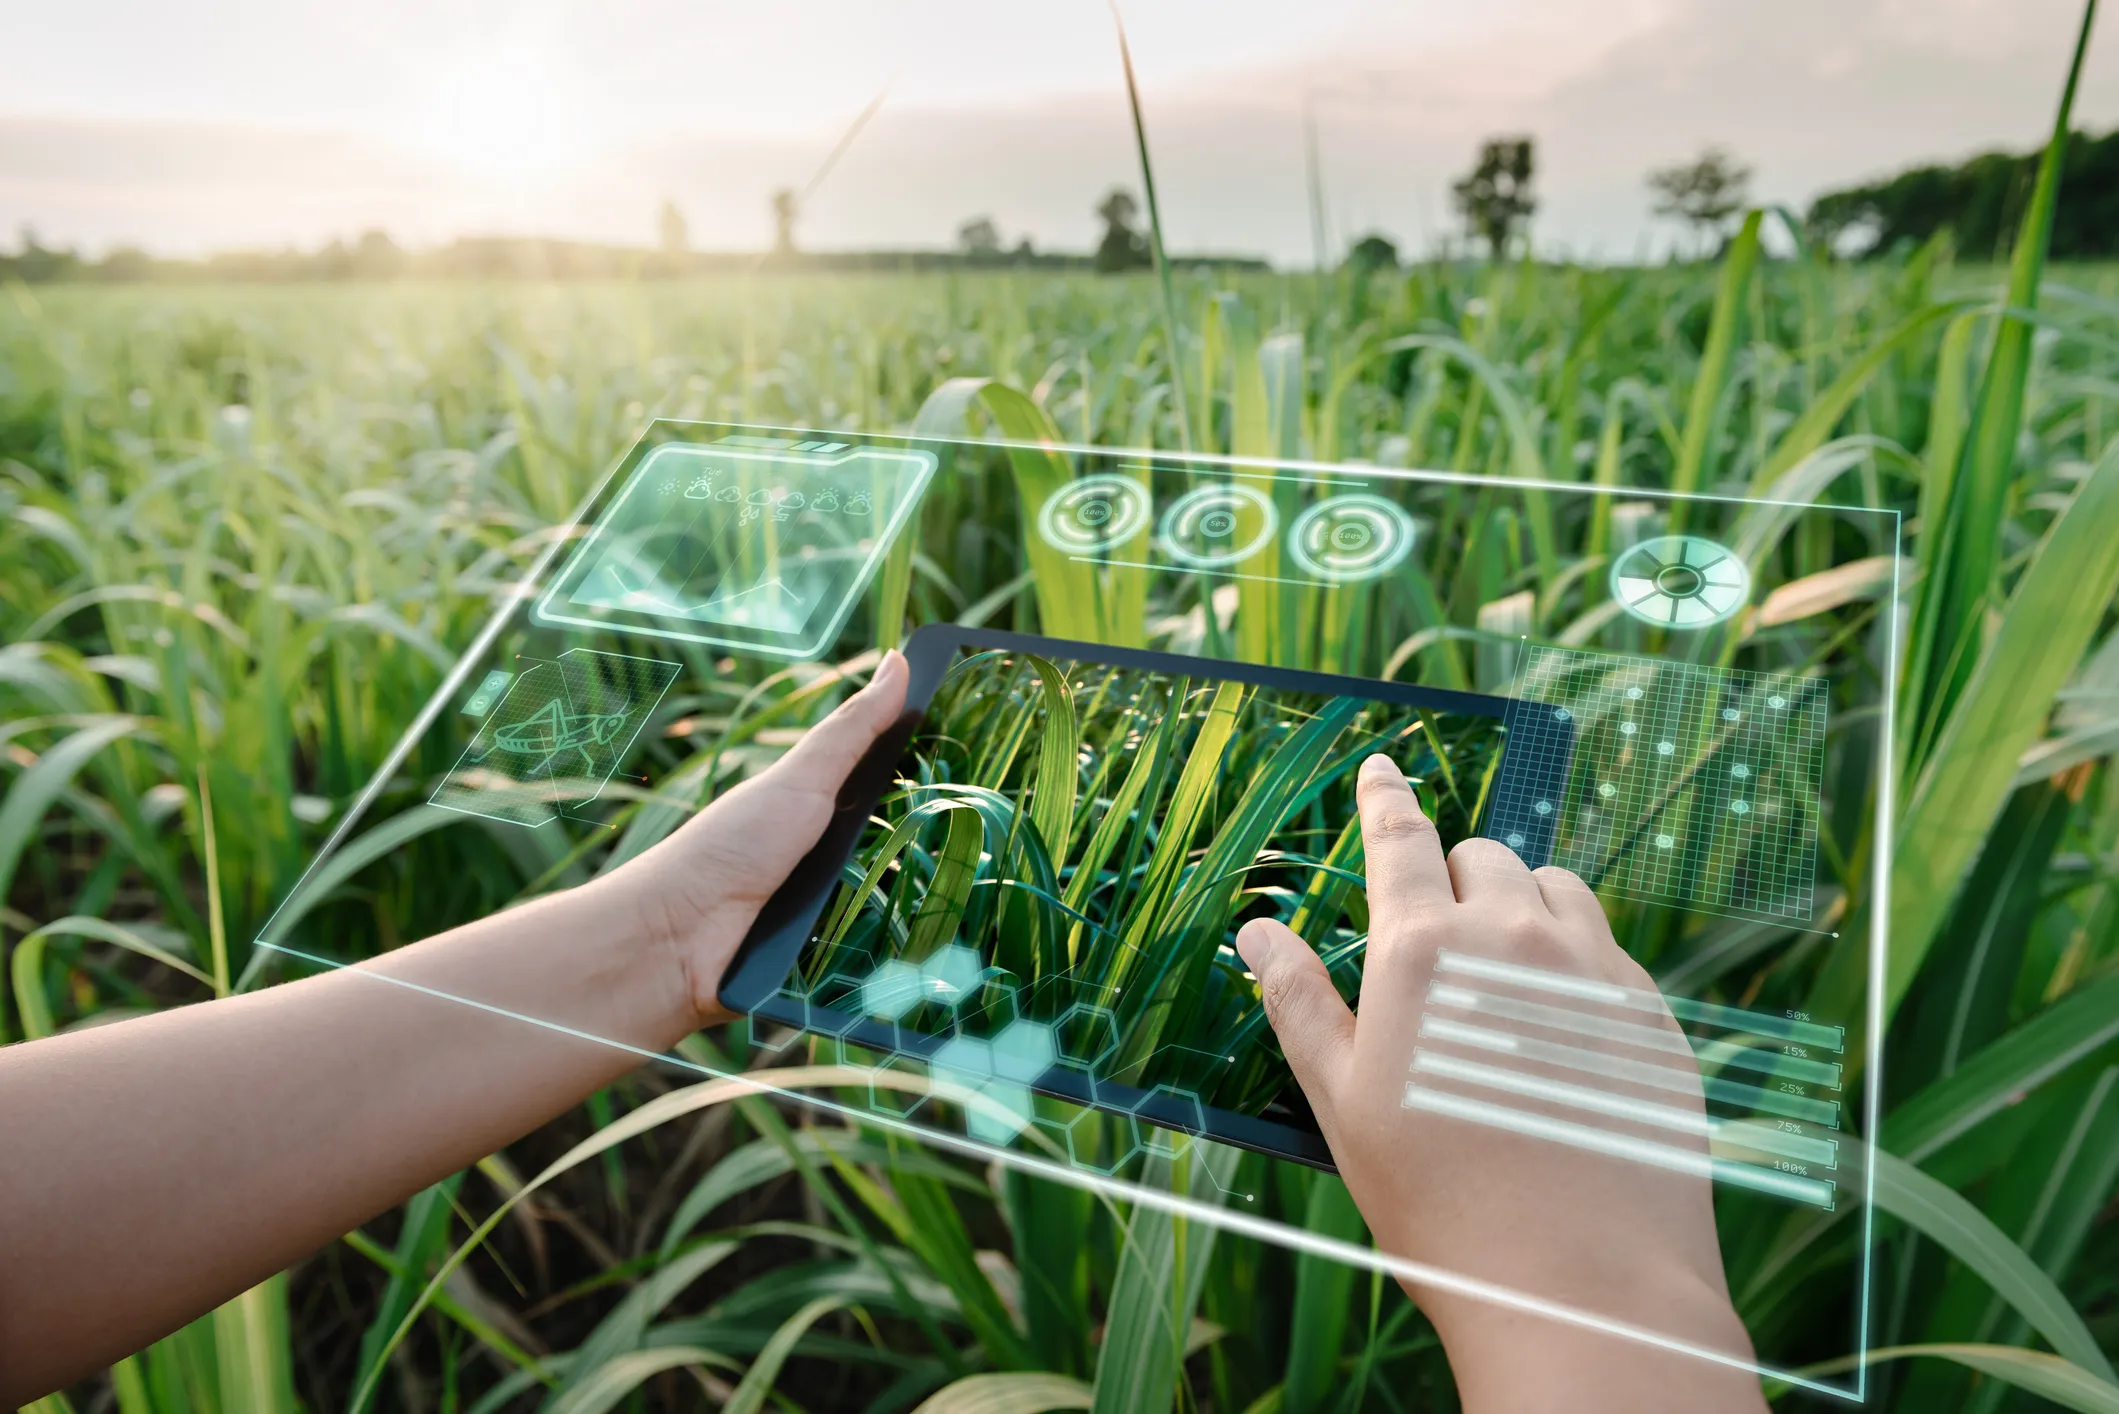 How Helpful Is Predictive Planting To Individual Farmers And The Agricultural Industry